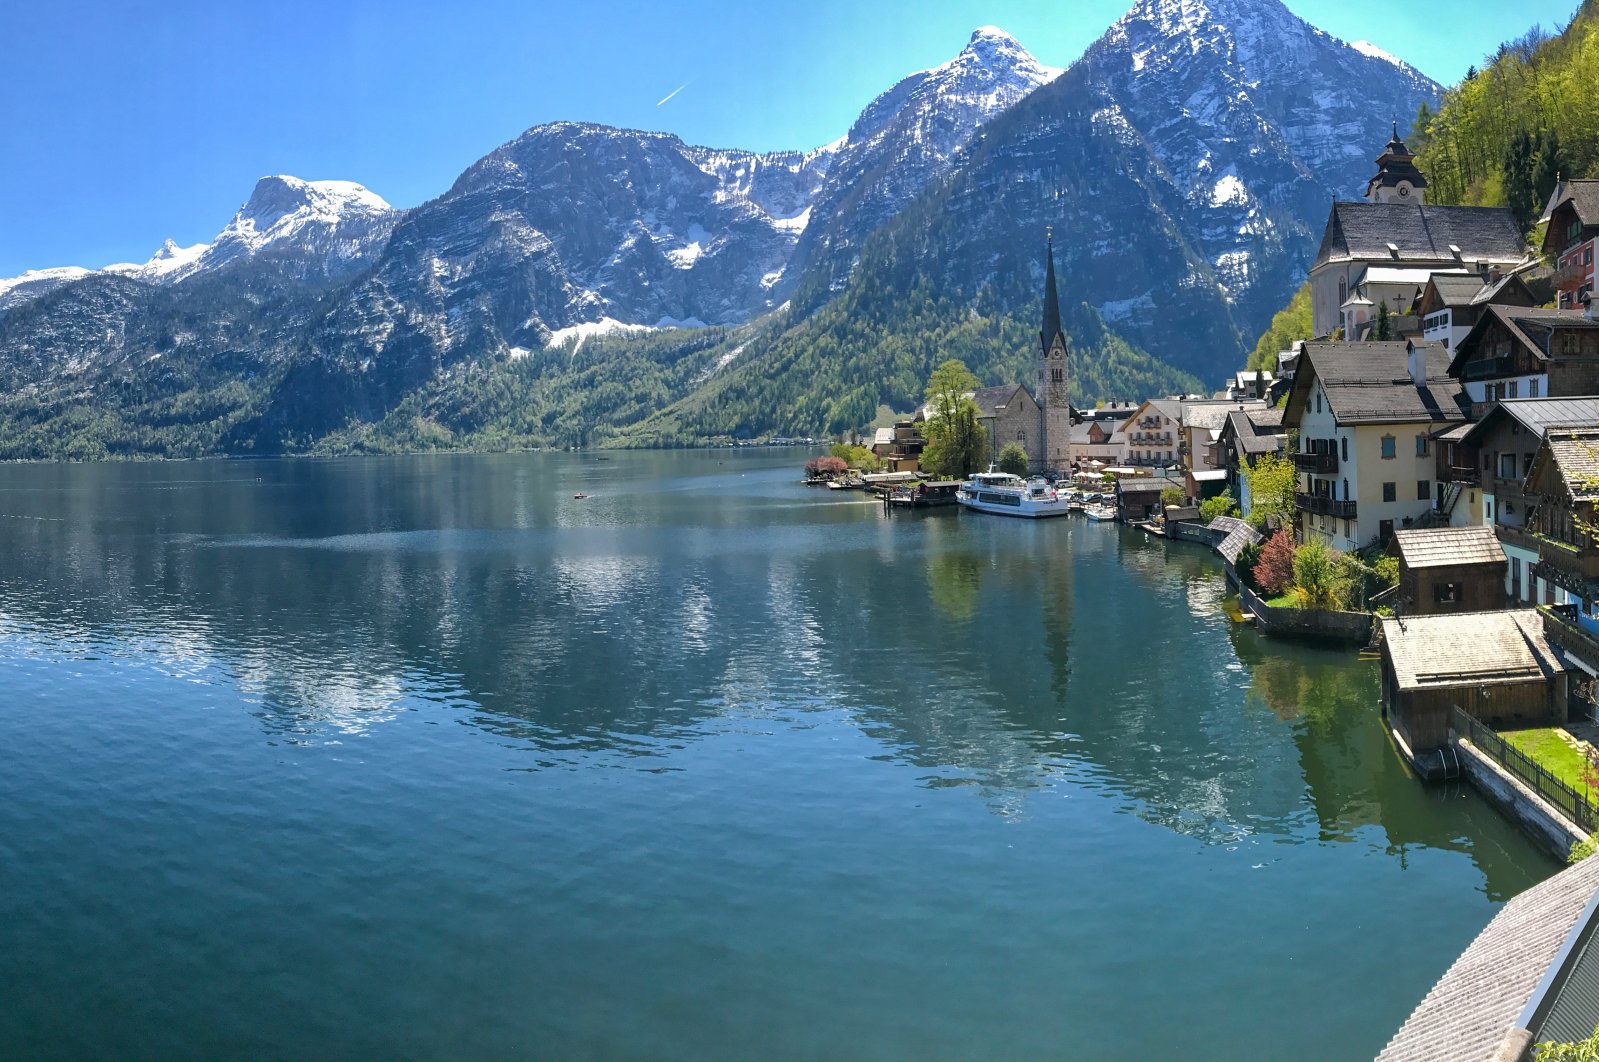 A view of the lake, the village and the Alps, in Hallstatt, Austria. (Photo by Özge Şengelen)